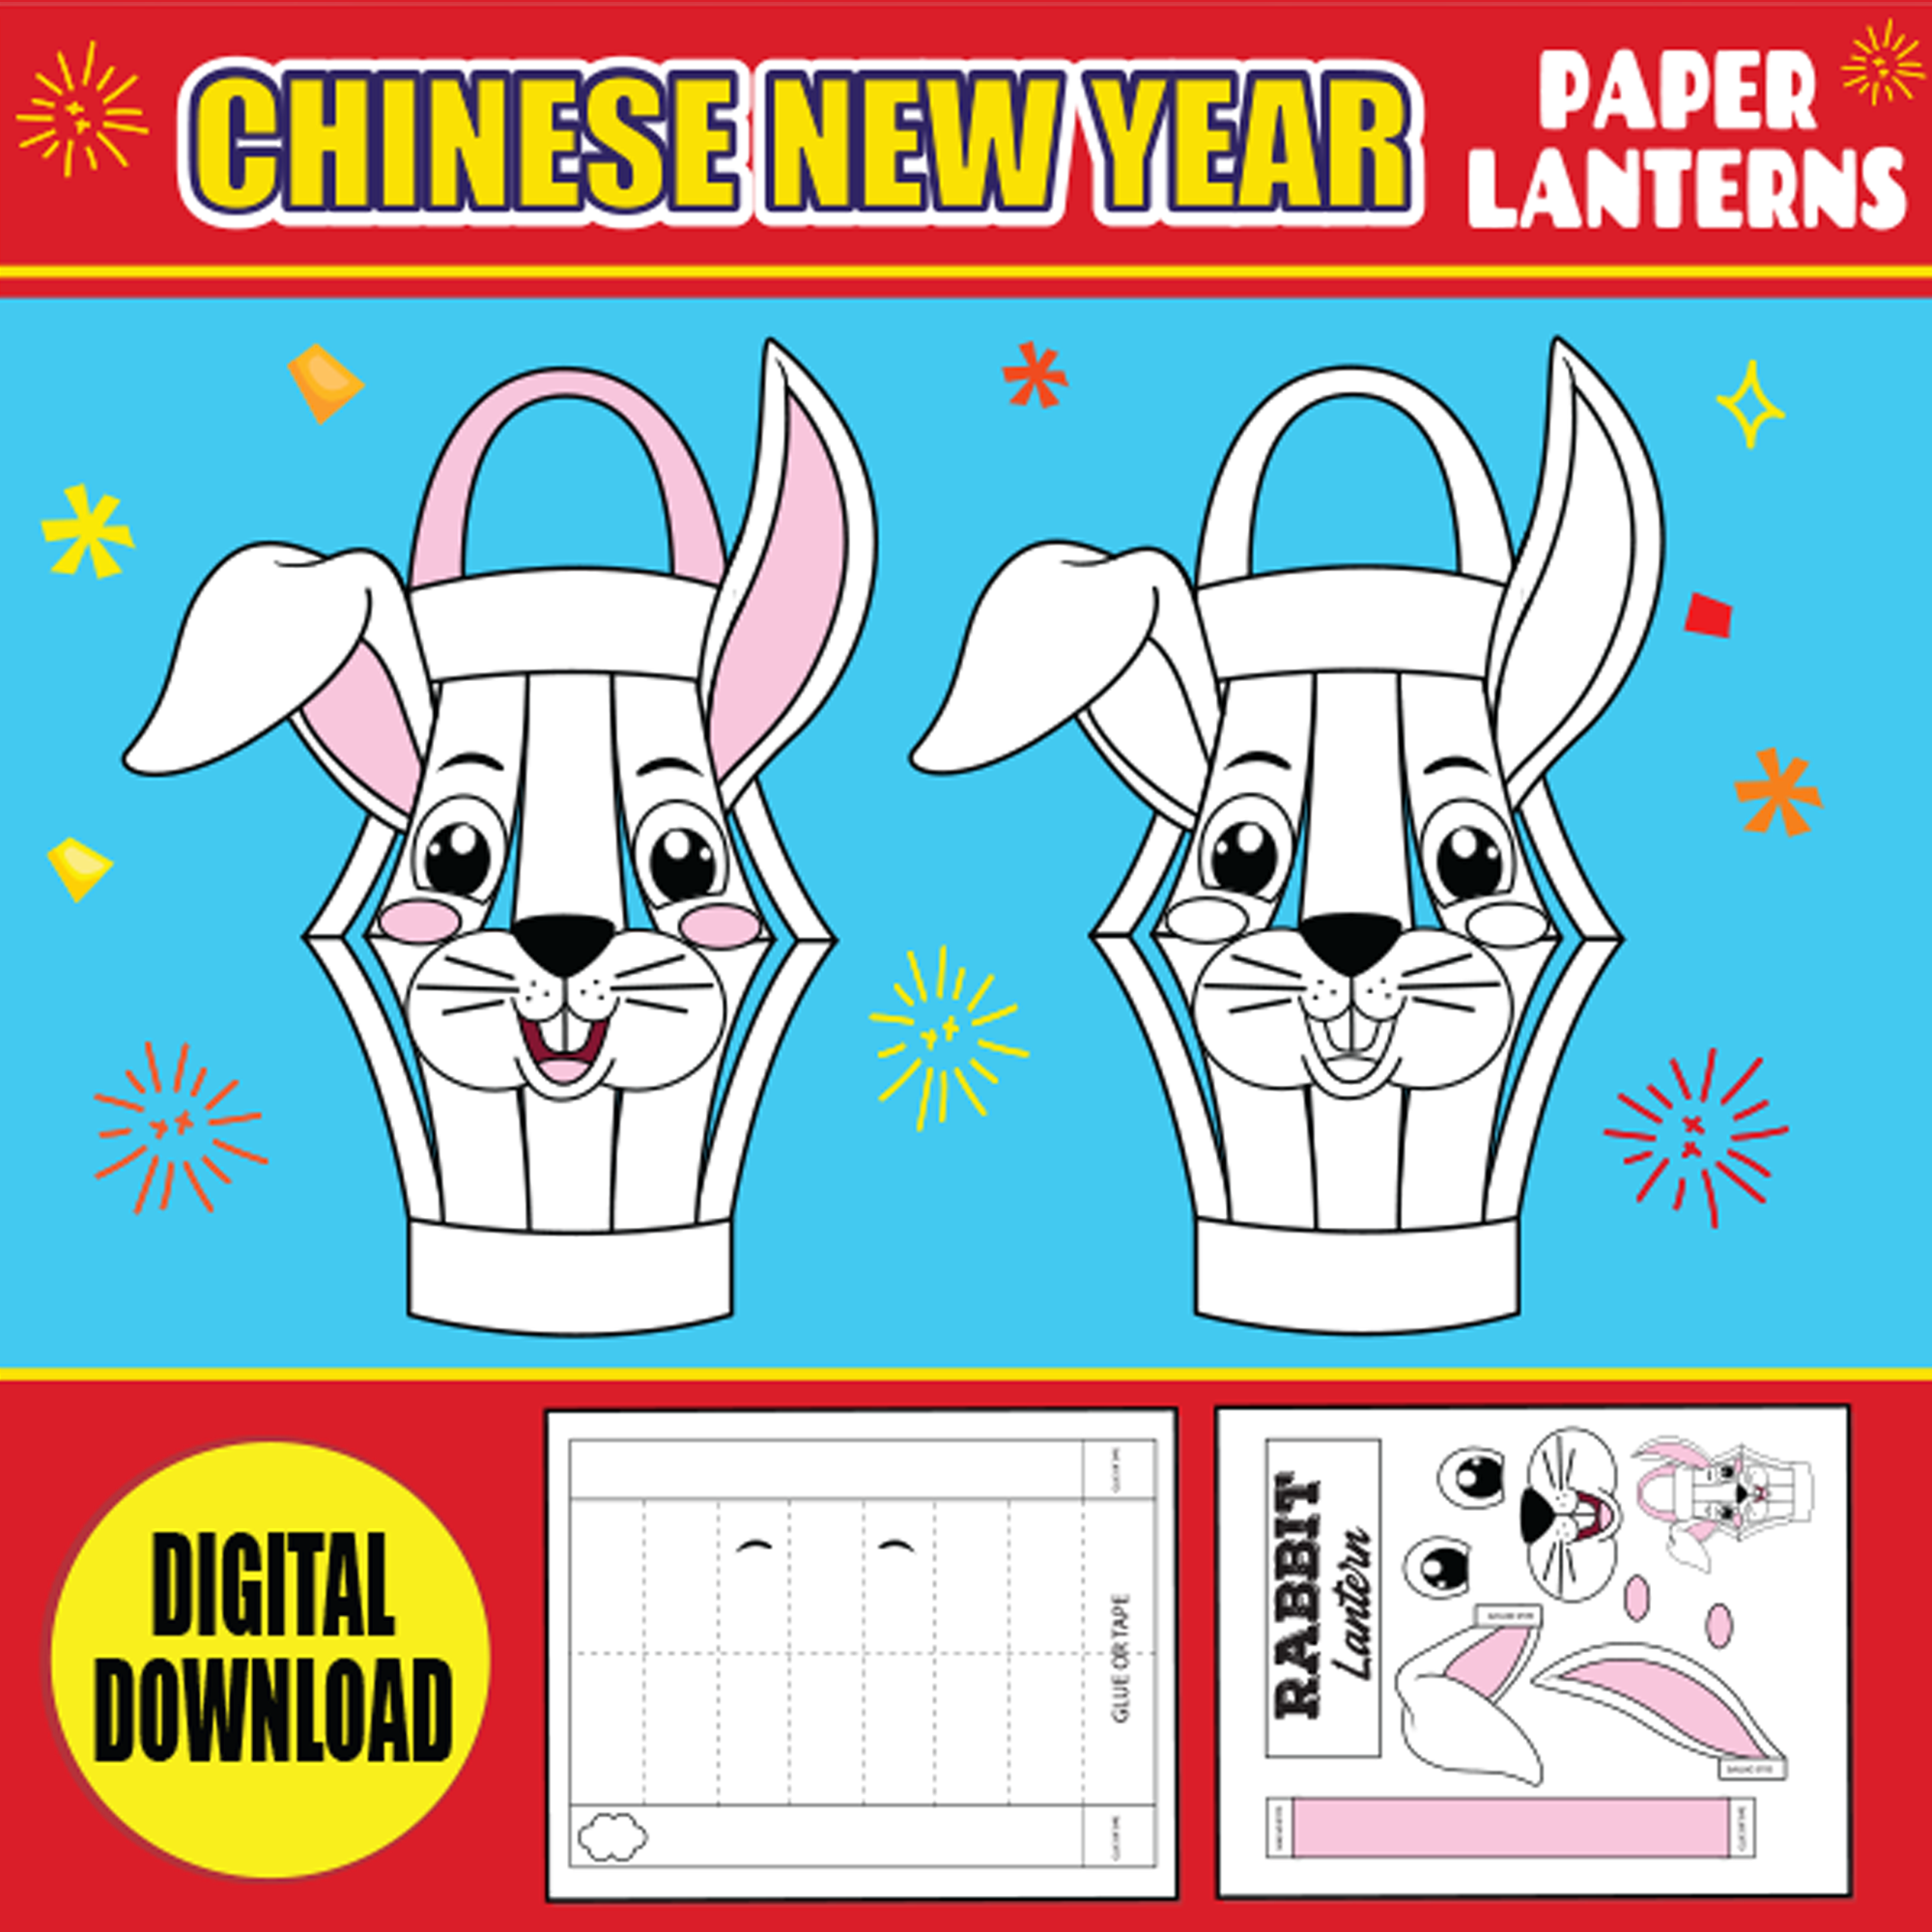 How To Make Paper Lanterns - Chinese New Year of the Rabbit